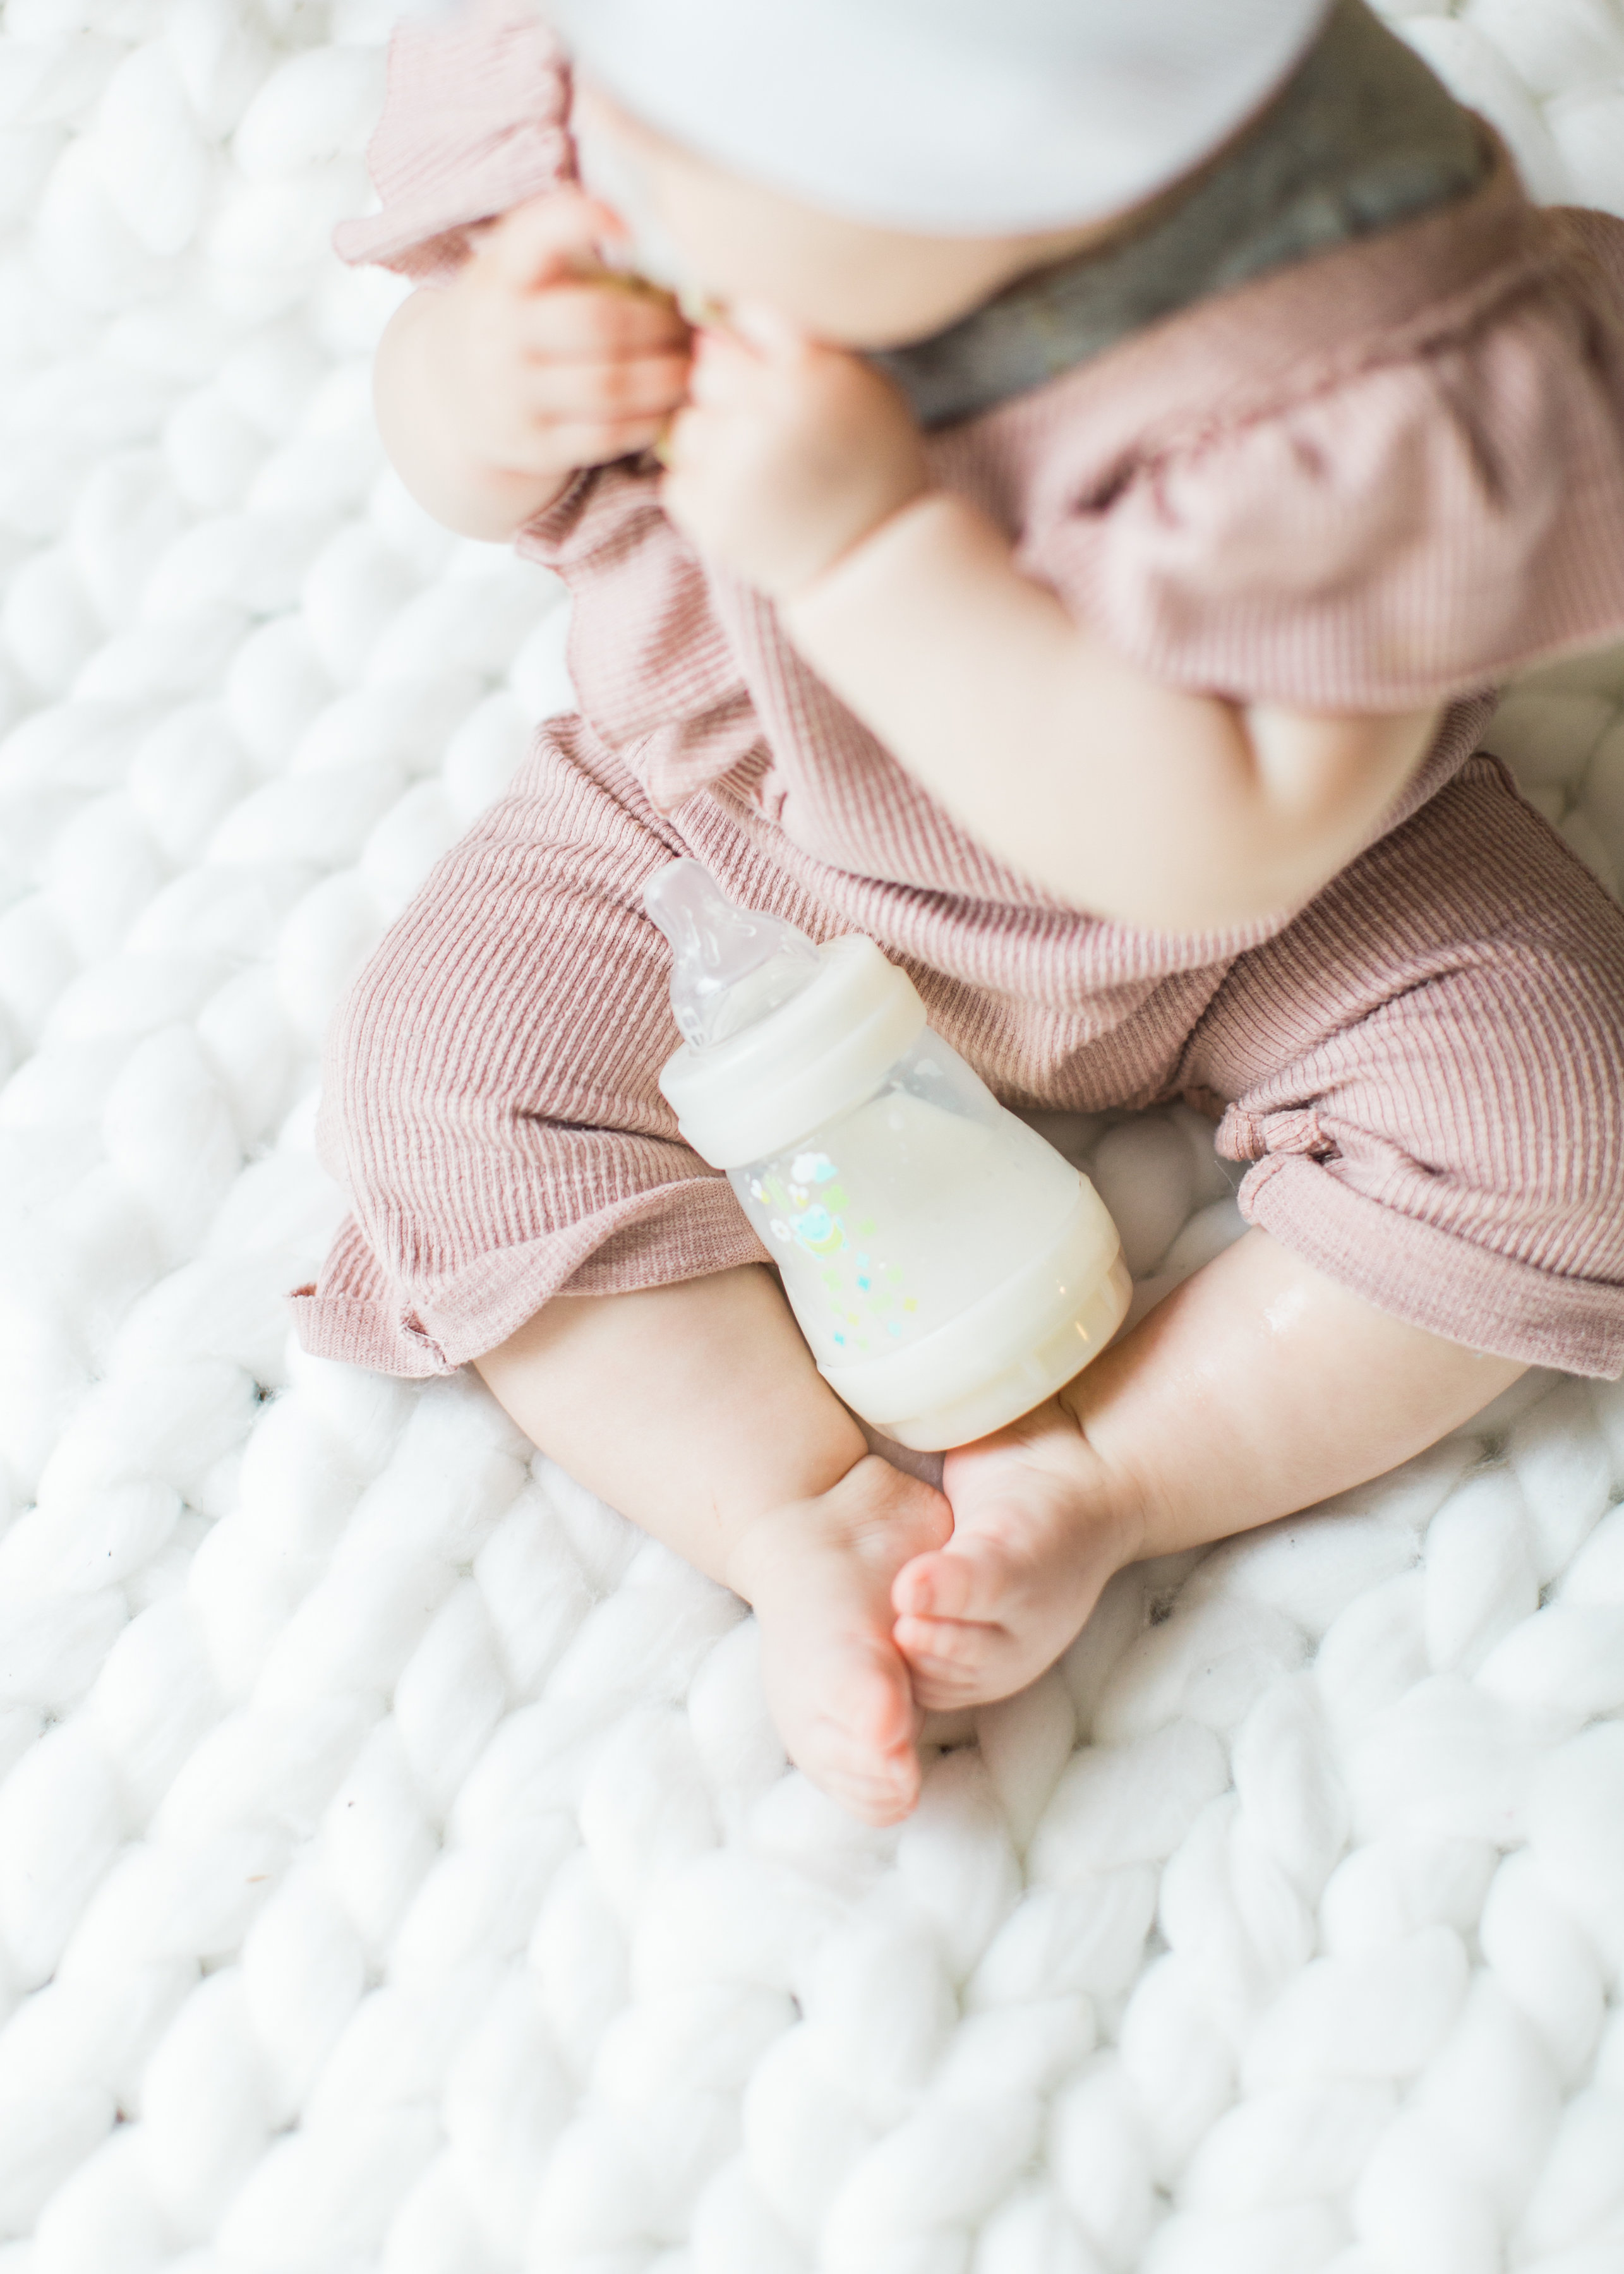 Having a baby with acid reflux can feel like the most exhausting uphill battle when you're a new parent. These are 7 tips and tricks for helping babies with reflux (that actually work!), plus a few hallmark signs that your baby does in fact have reflux. Click through for the details. #acidreflux #refluxbabies #babyreflux #infantreflux #gerd #colic #howtotreatreflux | glitterinc.com | @glitterinc